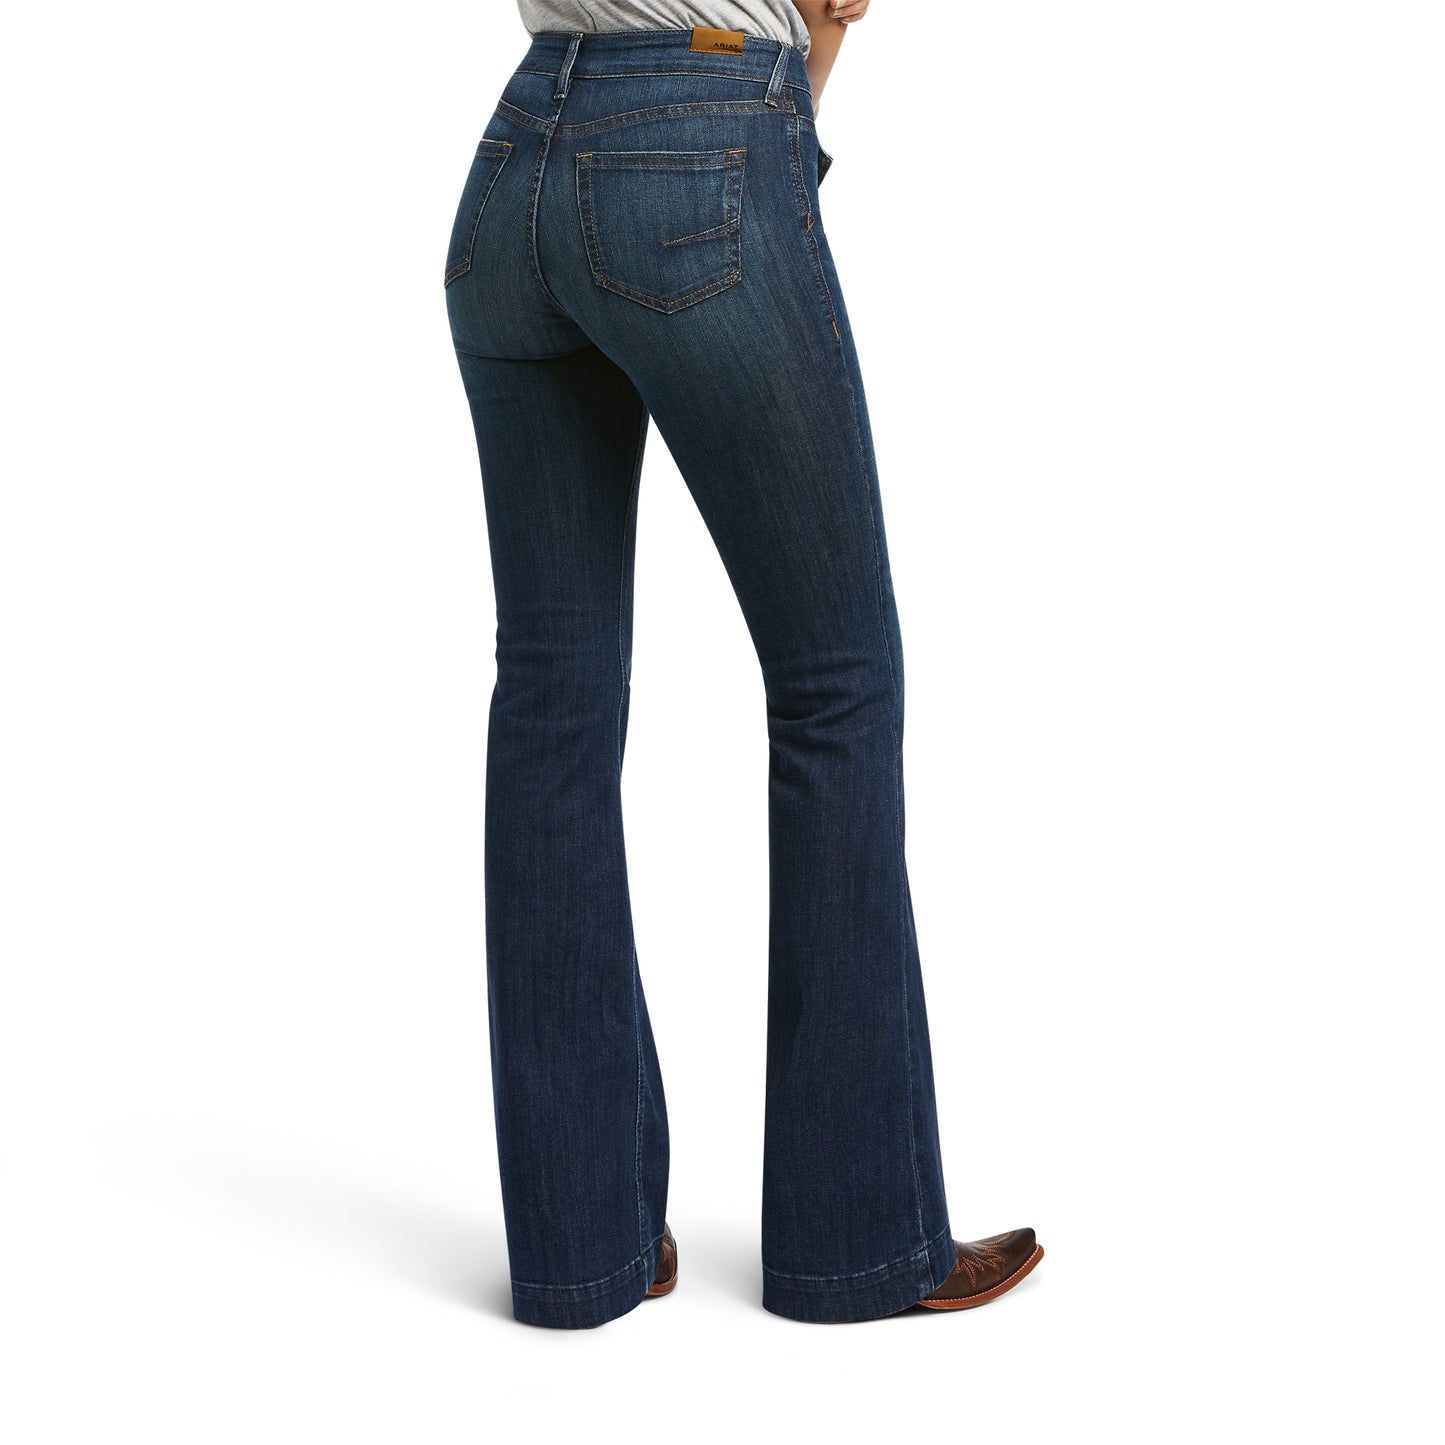 Ariat Ladies Slim Trouser High Rise Bessie Pacific Washed Jeans 10039597